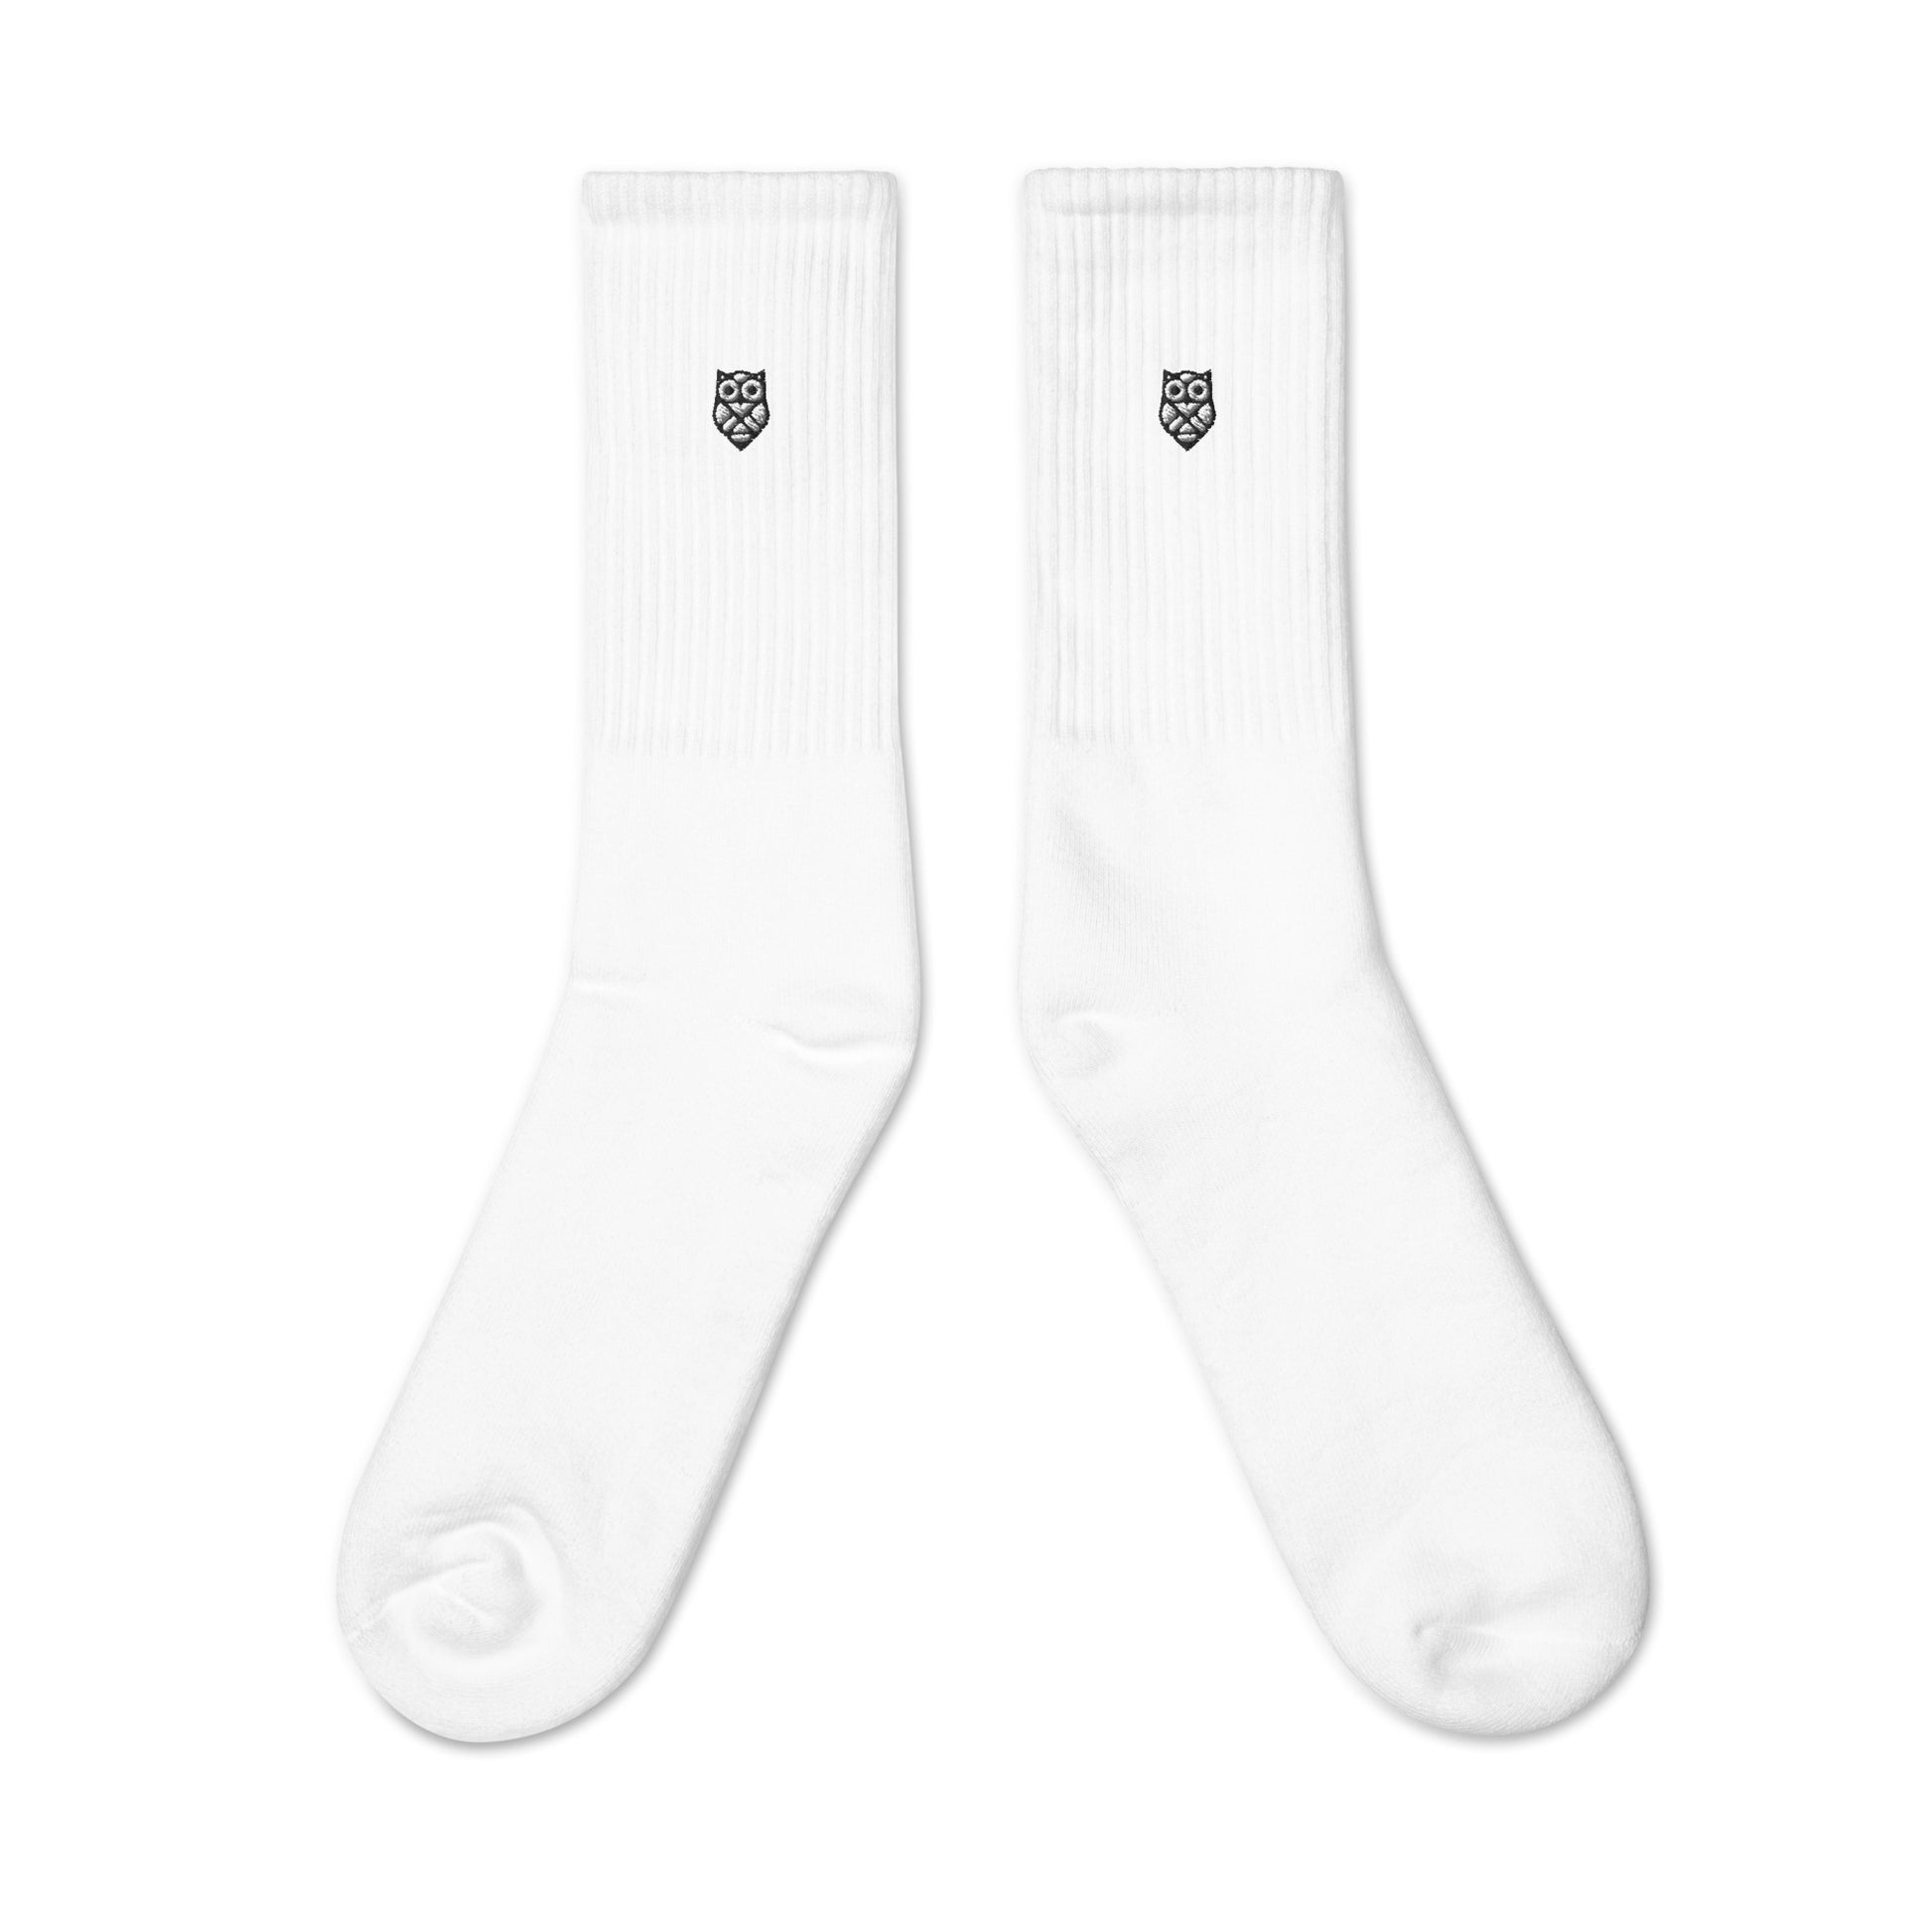 socks-from-the-front-with-owl-symbol